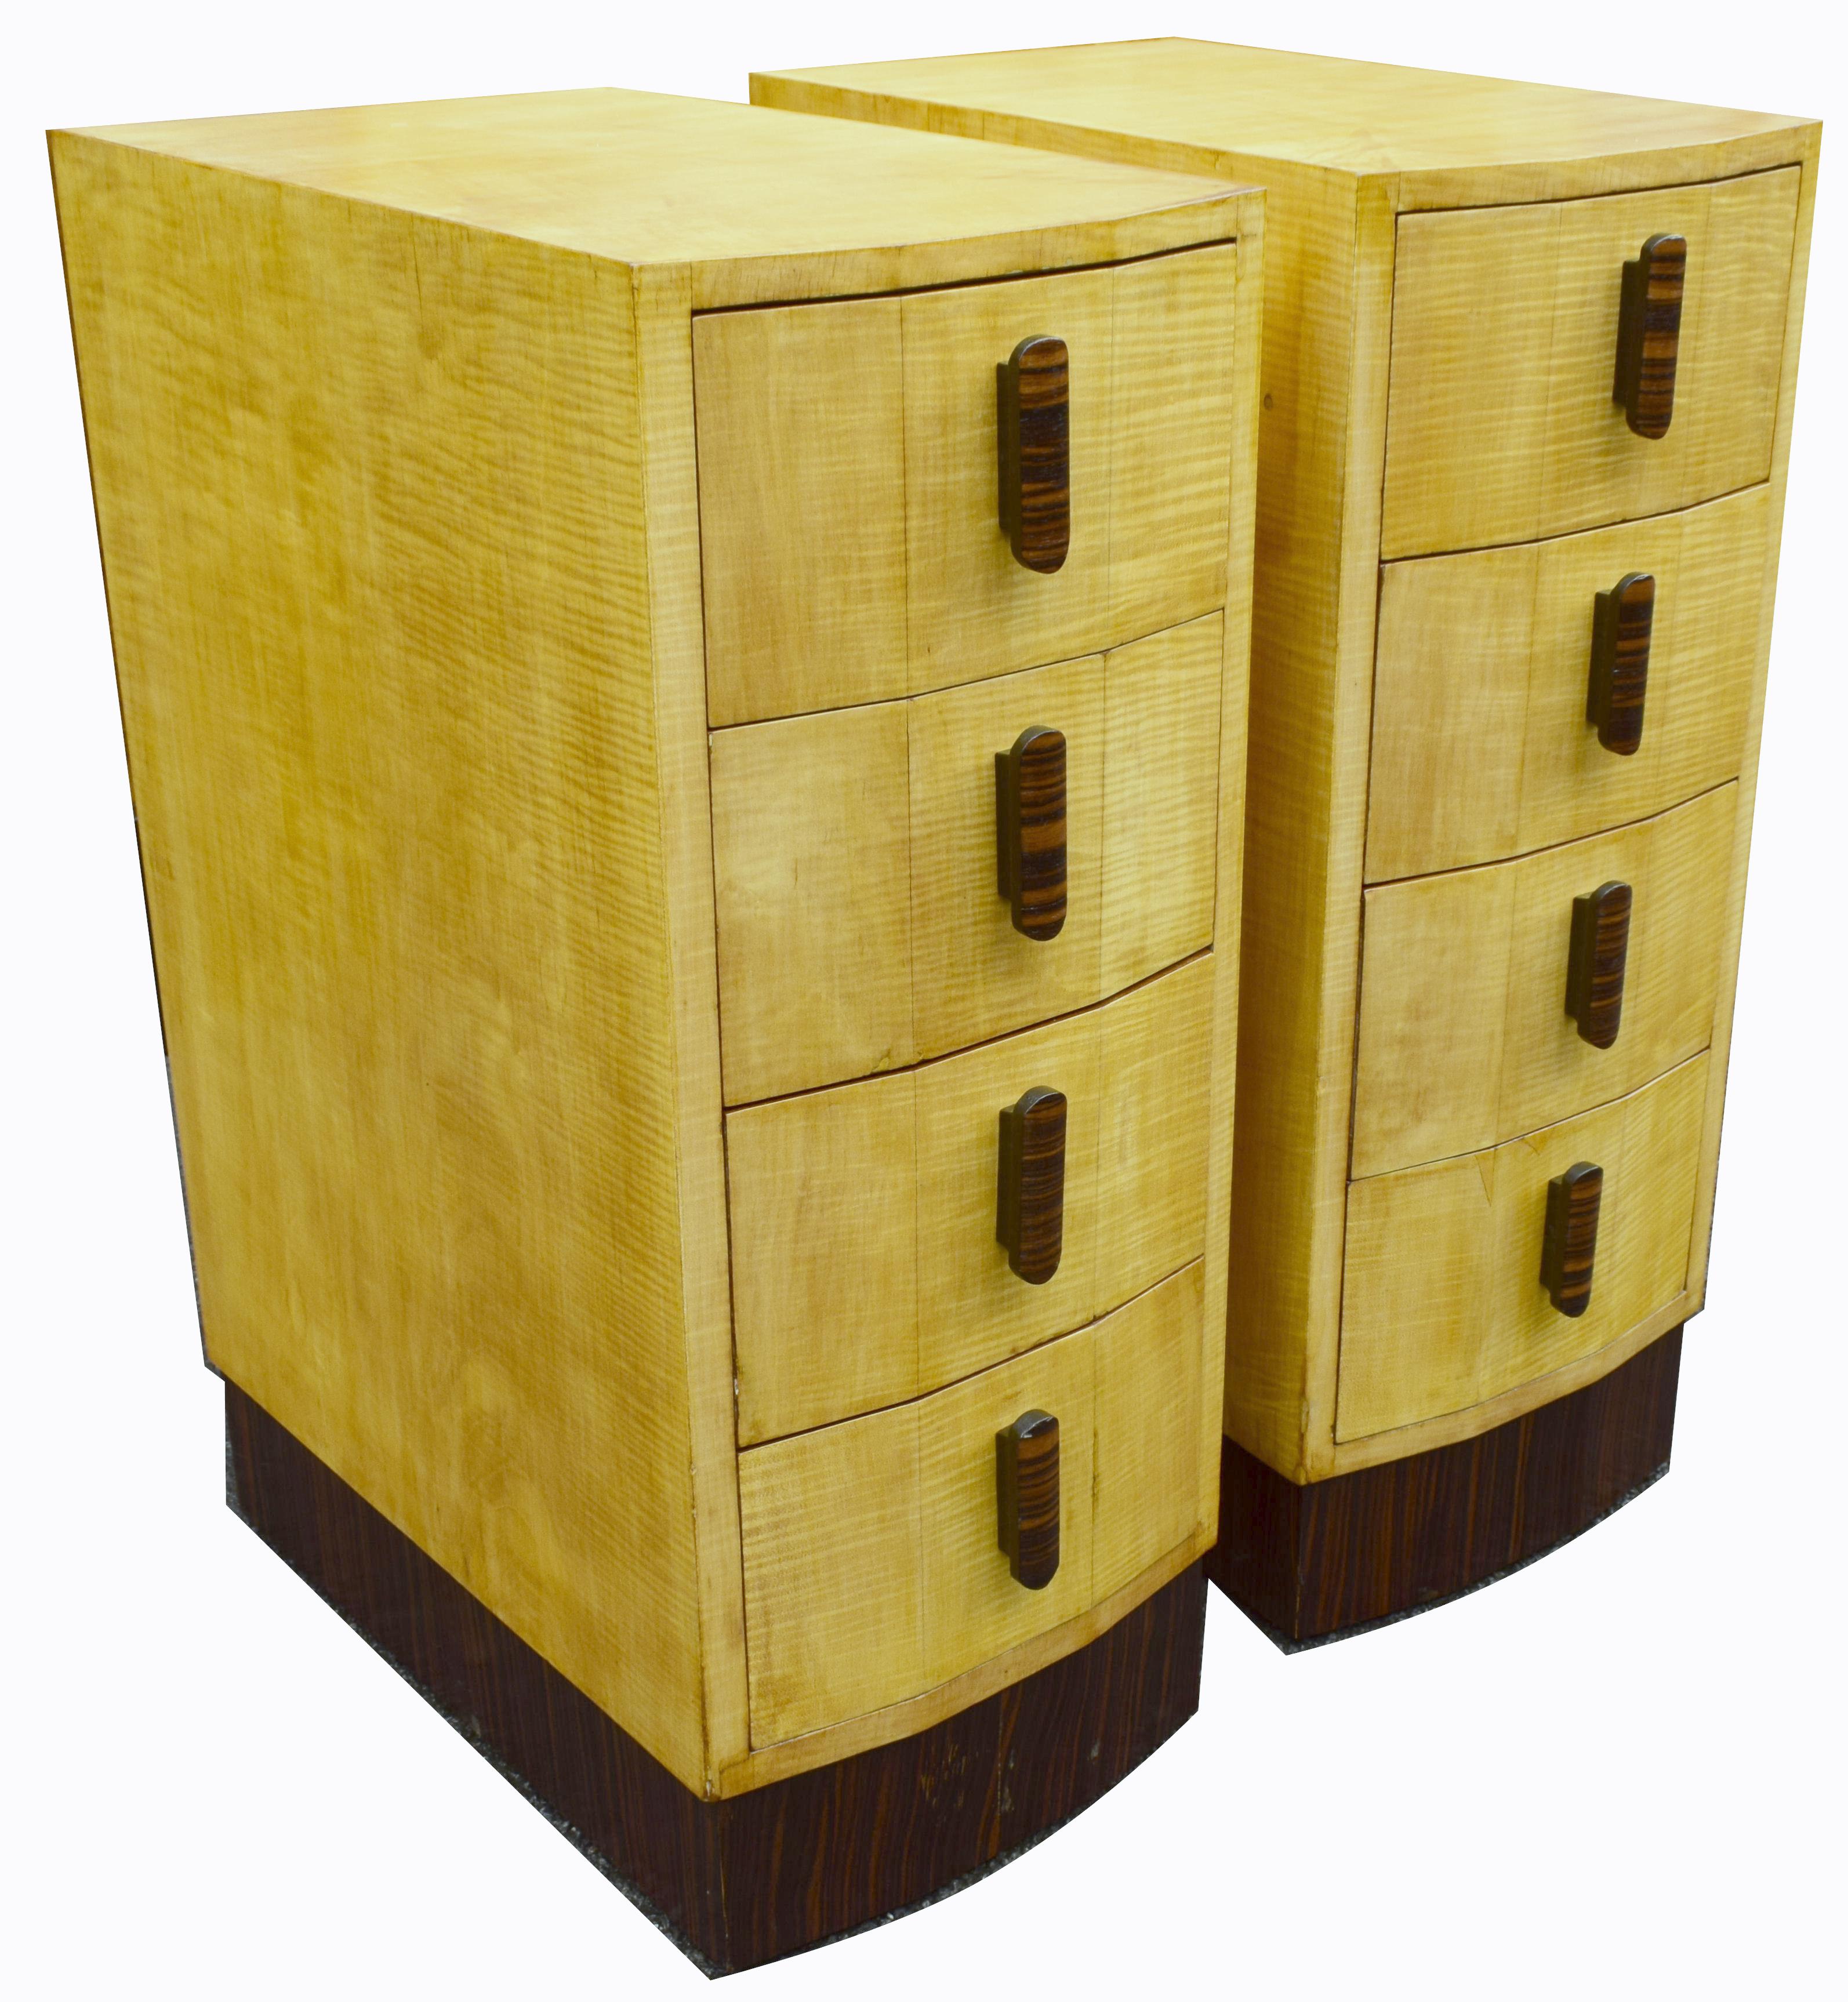 Superbly stylish 1930s Art Deco matching pair of bedside cabinet tables. Rare bleached blonde sycamore veneers with a beautiful Macassar handles. You can sense the quality in these cabinets immediately, from the timbers used to the fine detailing of